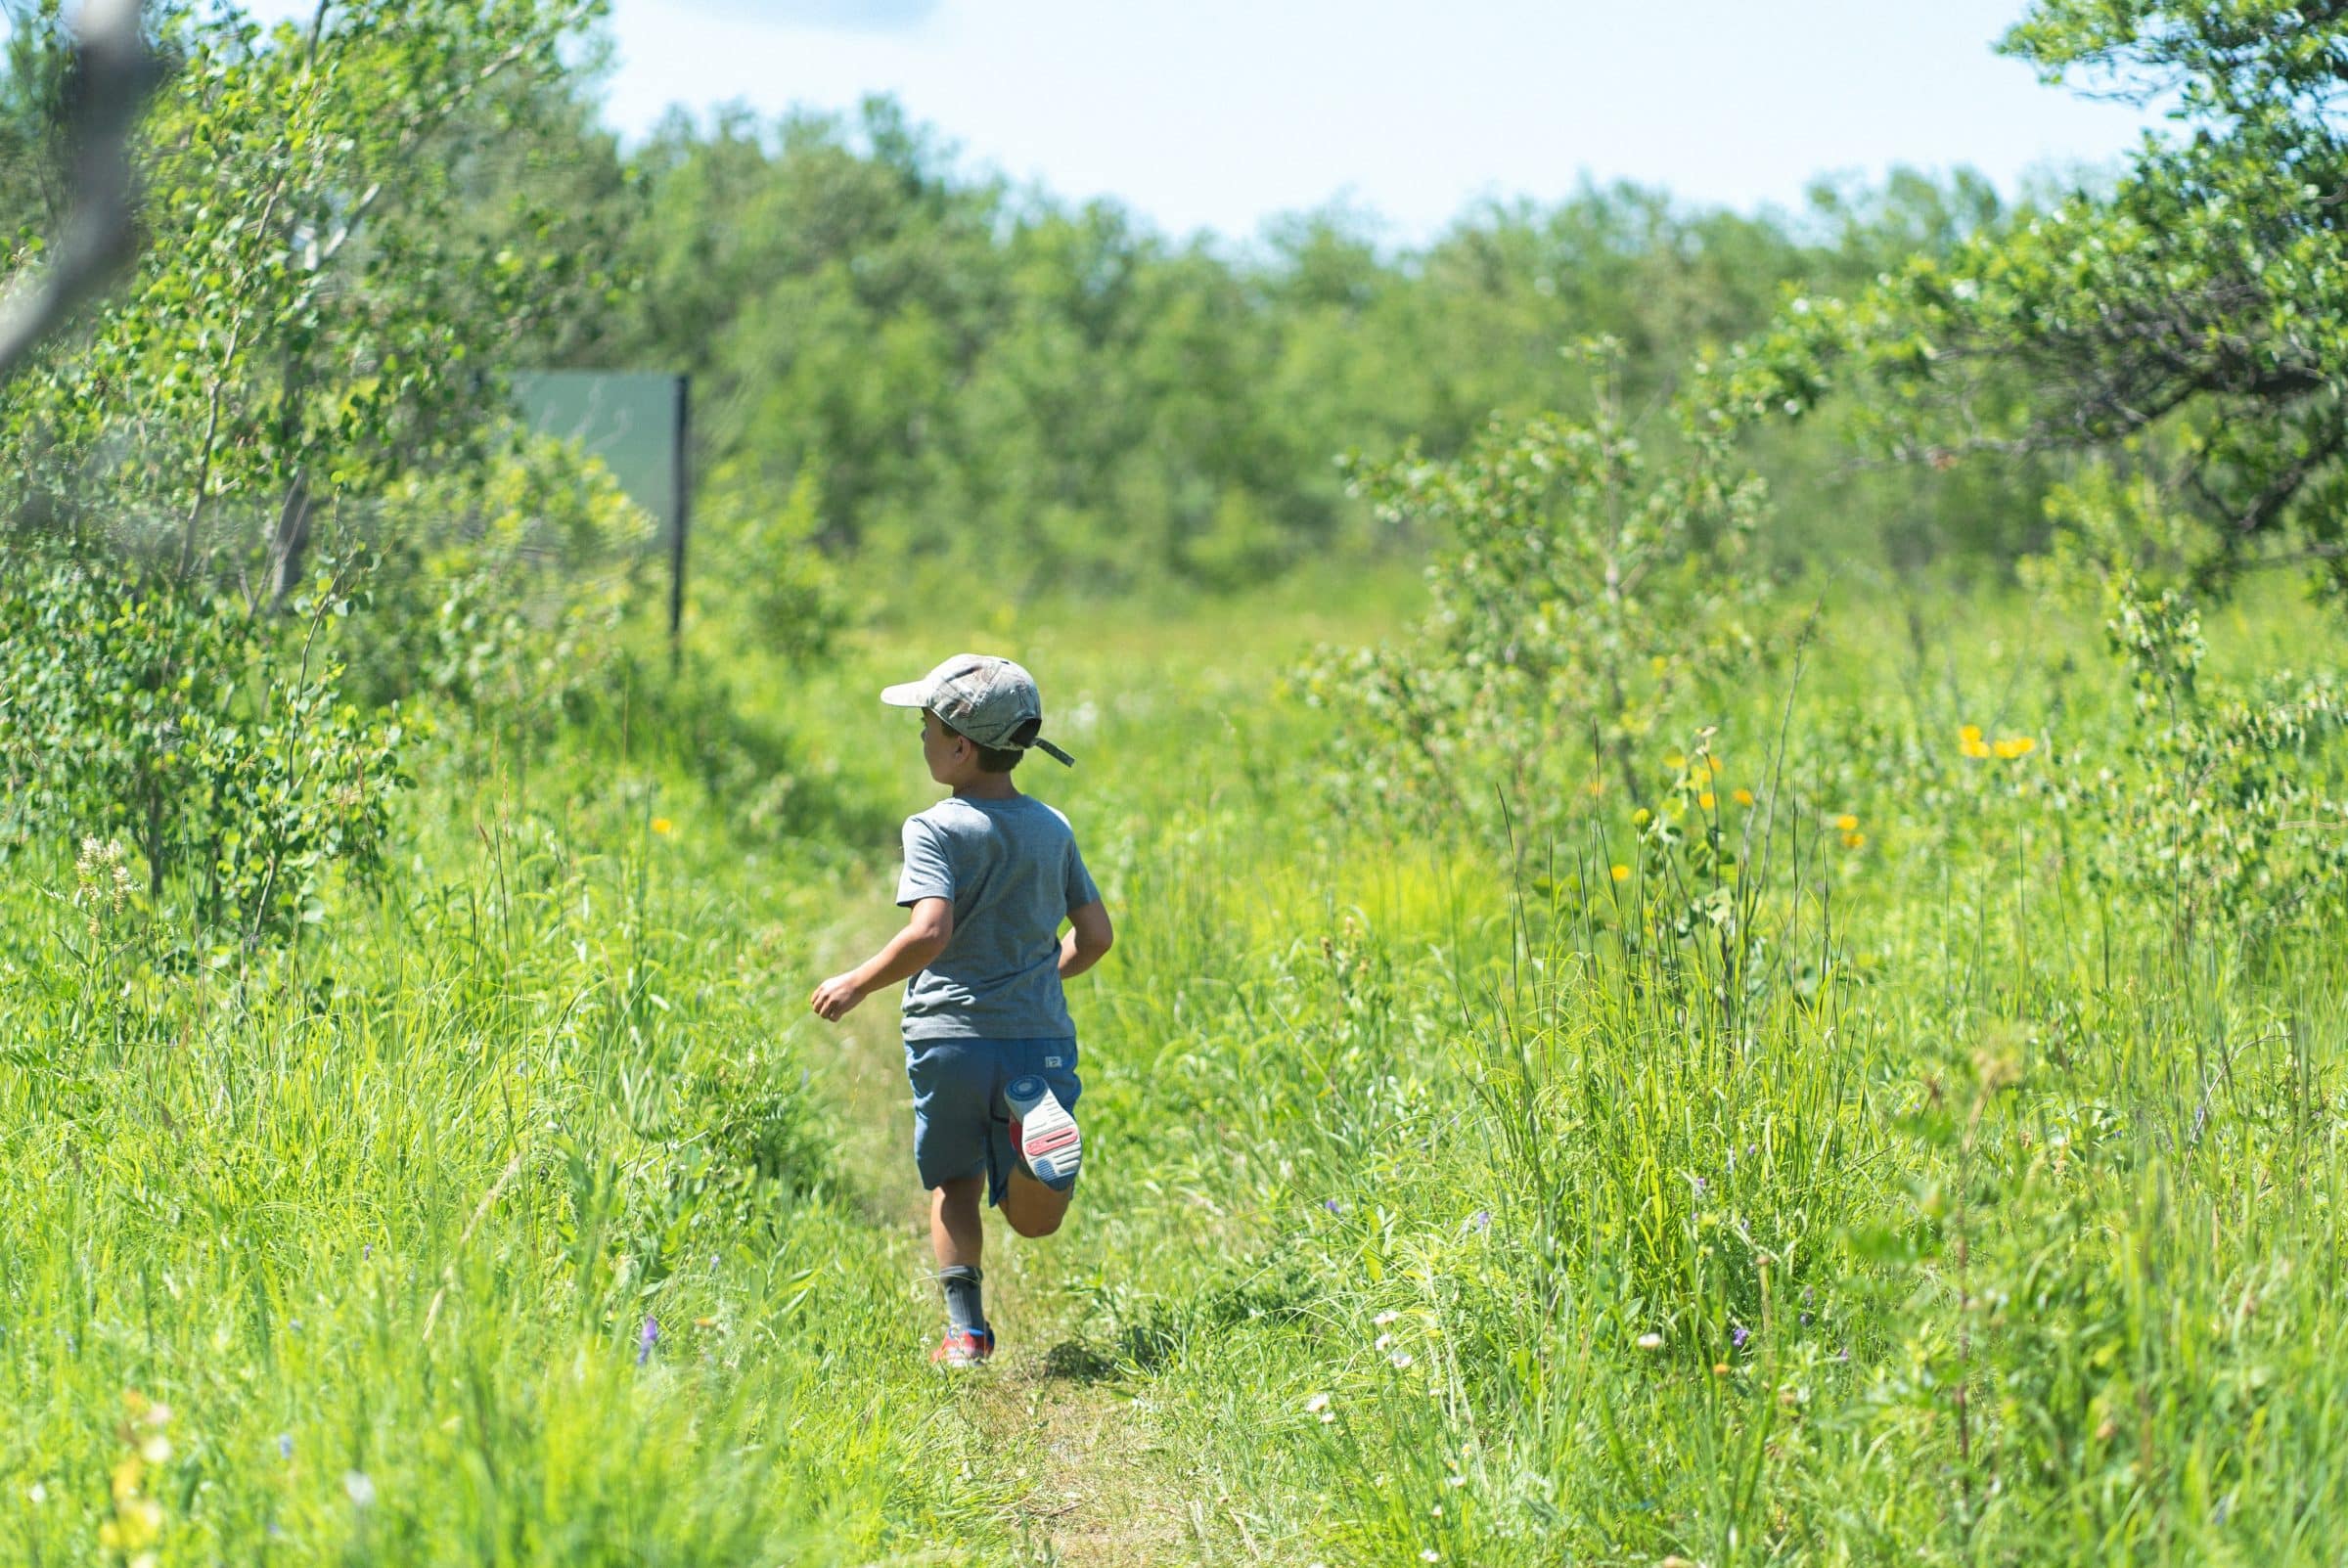 A child running on a grassy trail